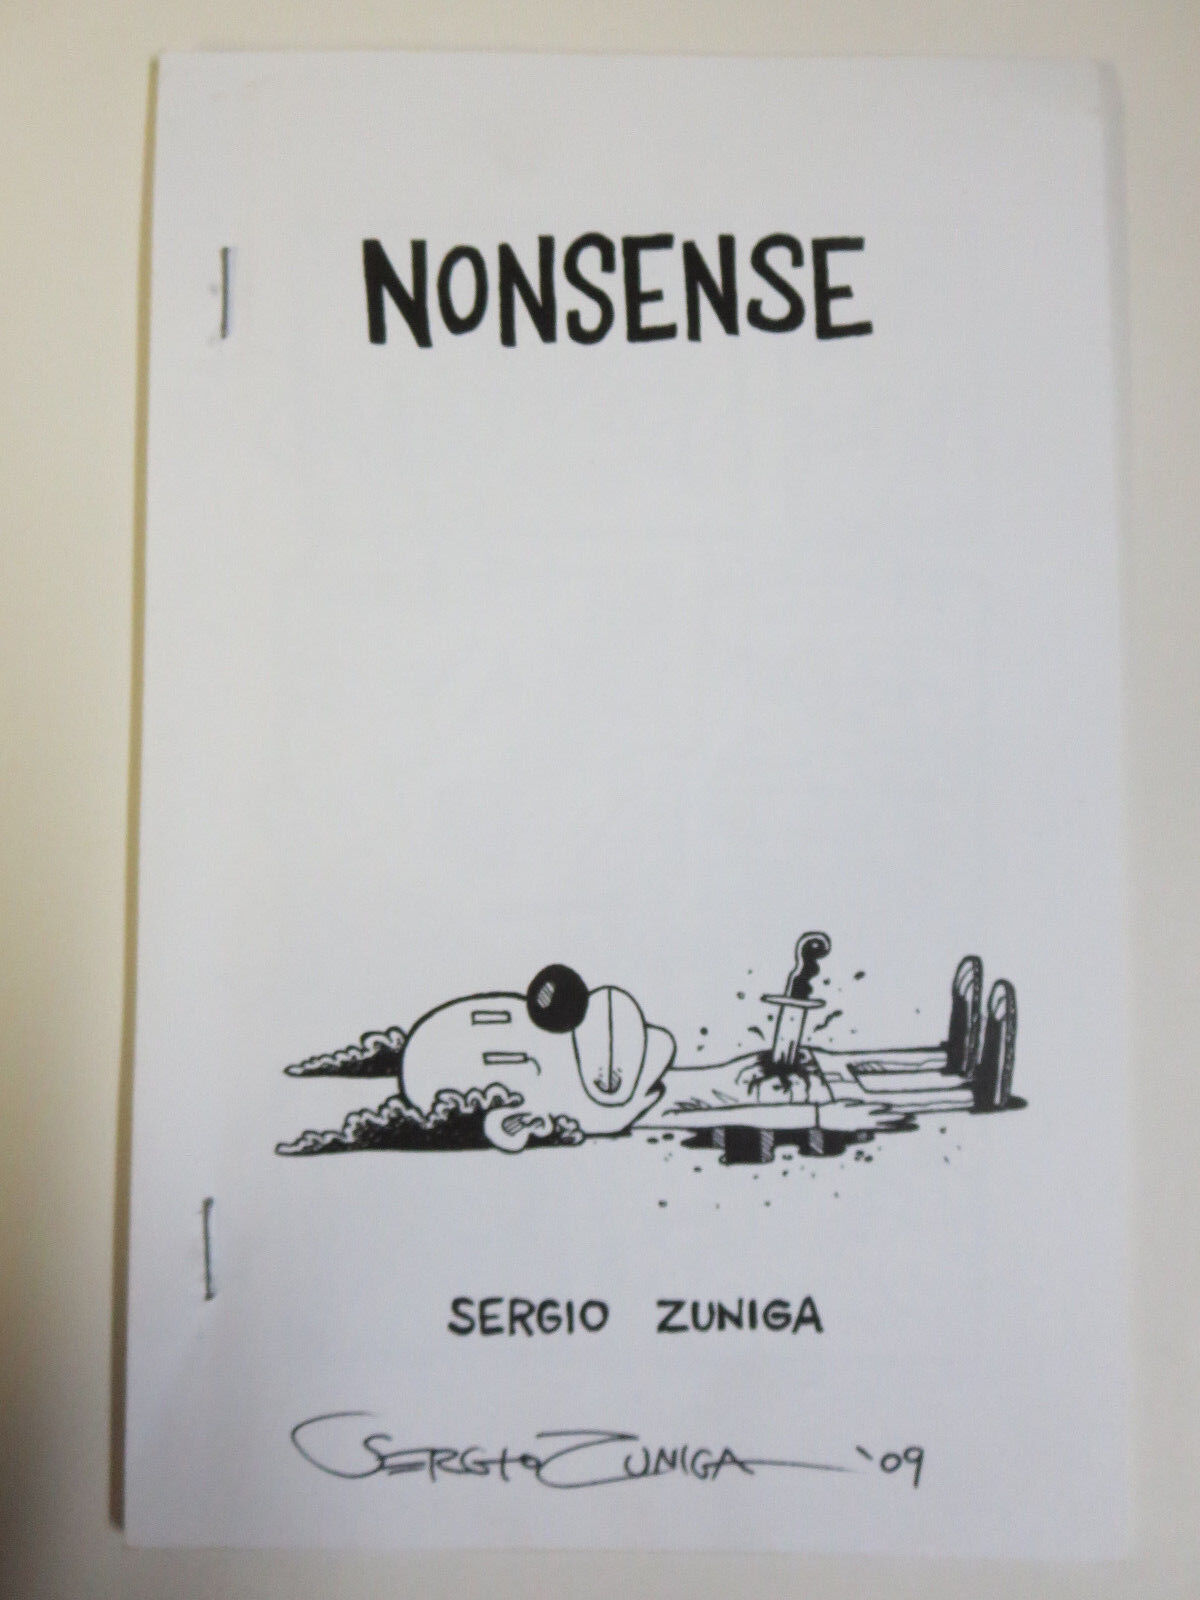 Nonsense by Sergio Zuniga Signed Indie Sicko Comics from NYC